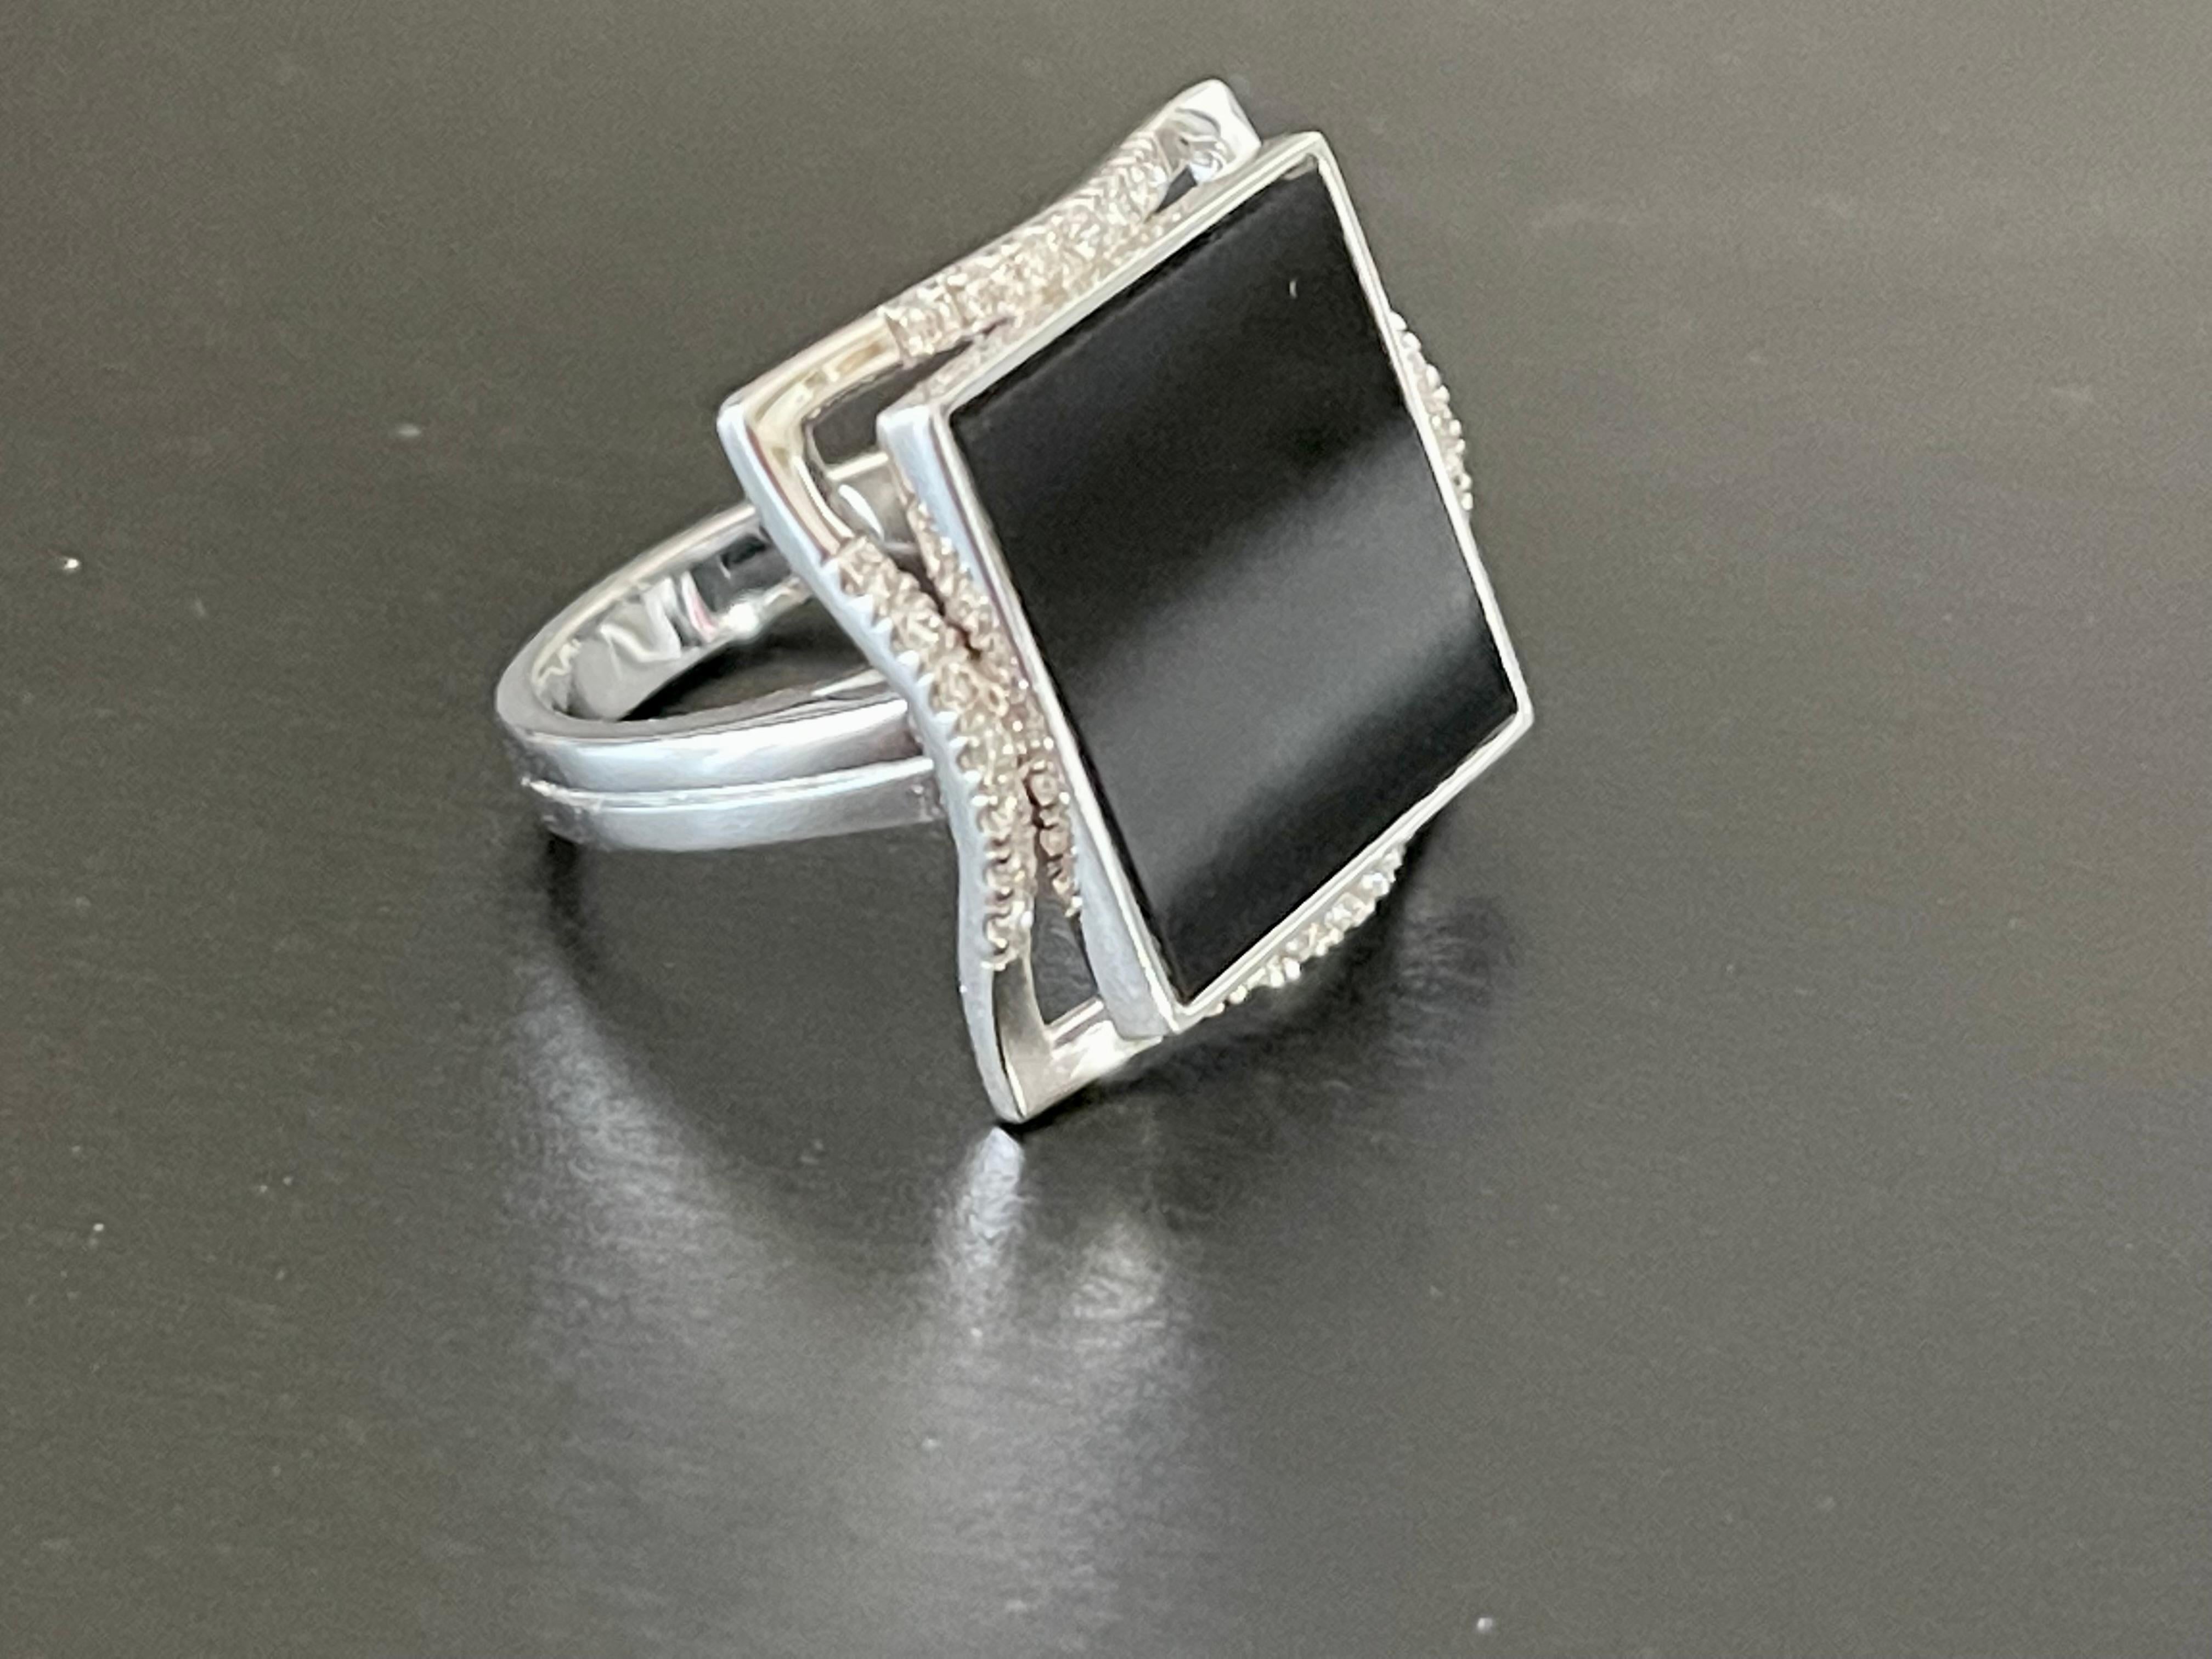 Attractive moder n 18 K whitel Gold Ring featuring 1 square cut Onyx that is accentuated by 28 brillant cut Diamonds weighing 0.20 ct. 
The ring is currently size 14/54( american ring size 7) but can easily be resized. 
Masterfully handcrafted